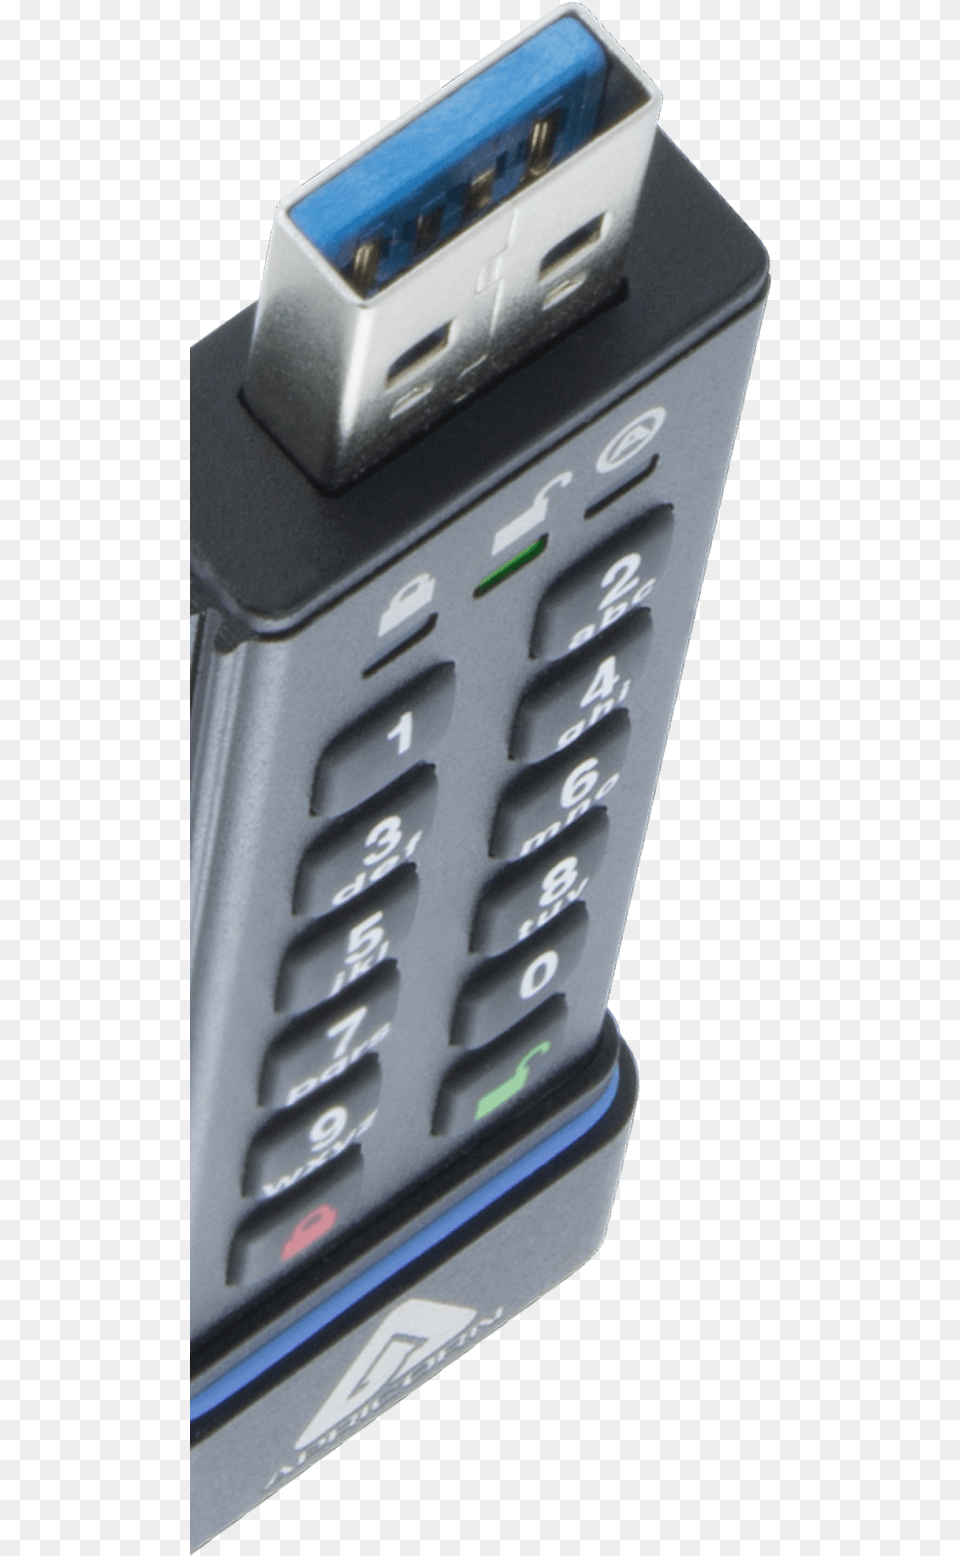 Am Product, Electronics, Phone, Mobile Phone Png